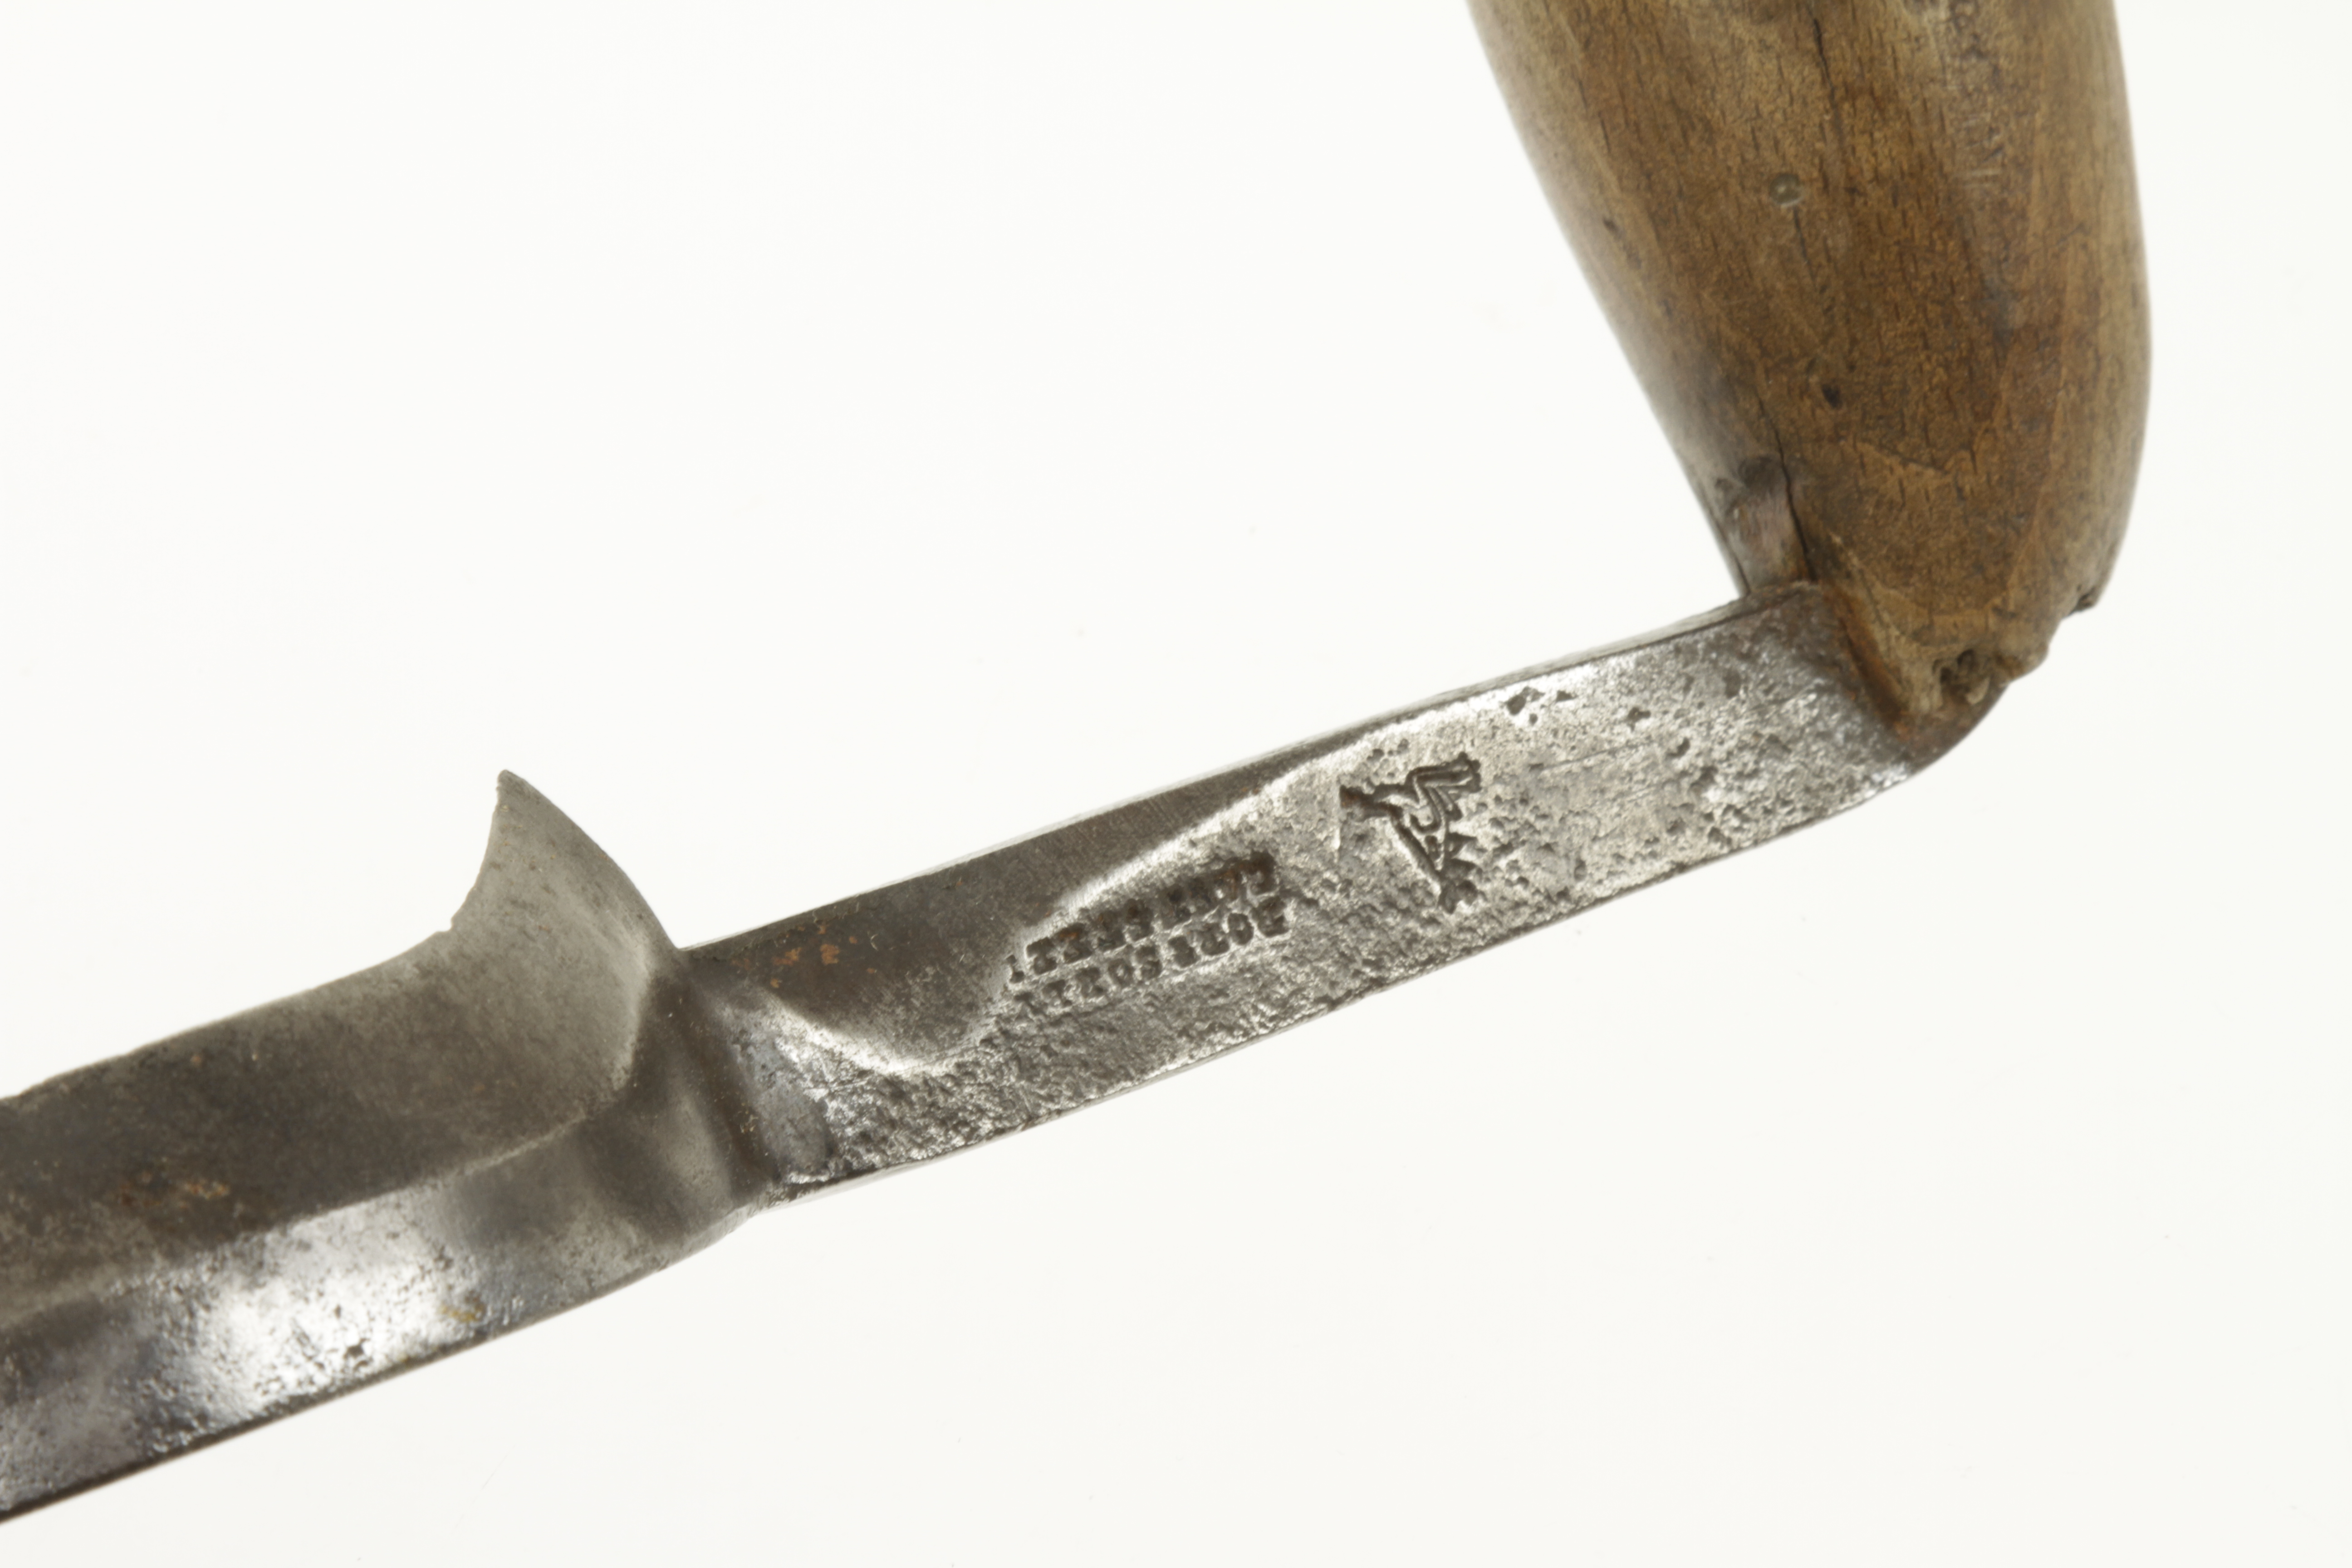 A forkstaff or handle makers drawknife by SORBY G+ - Image 3 of 3